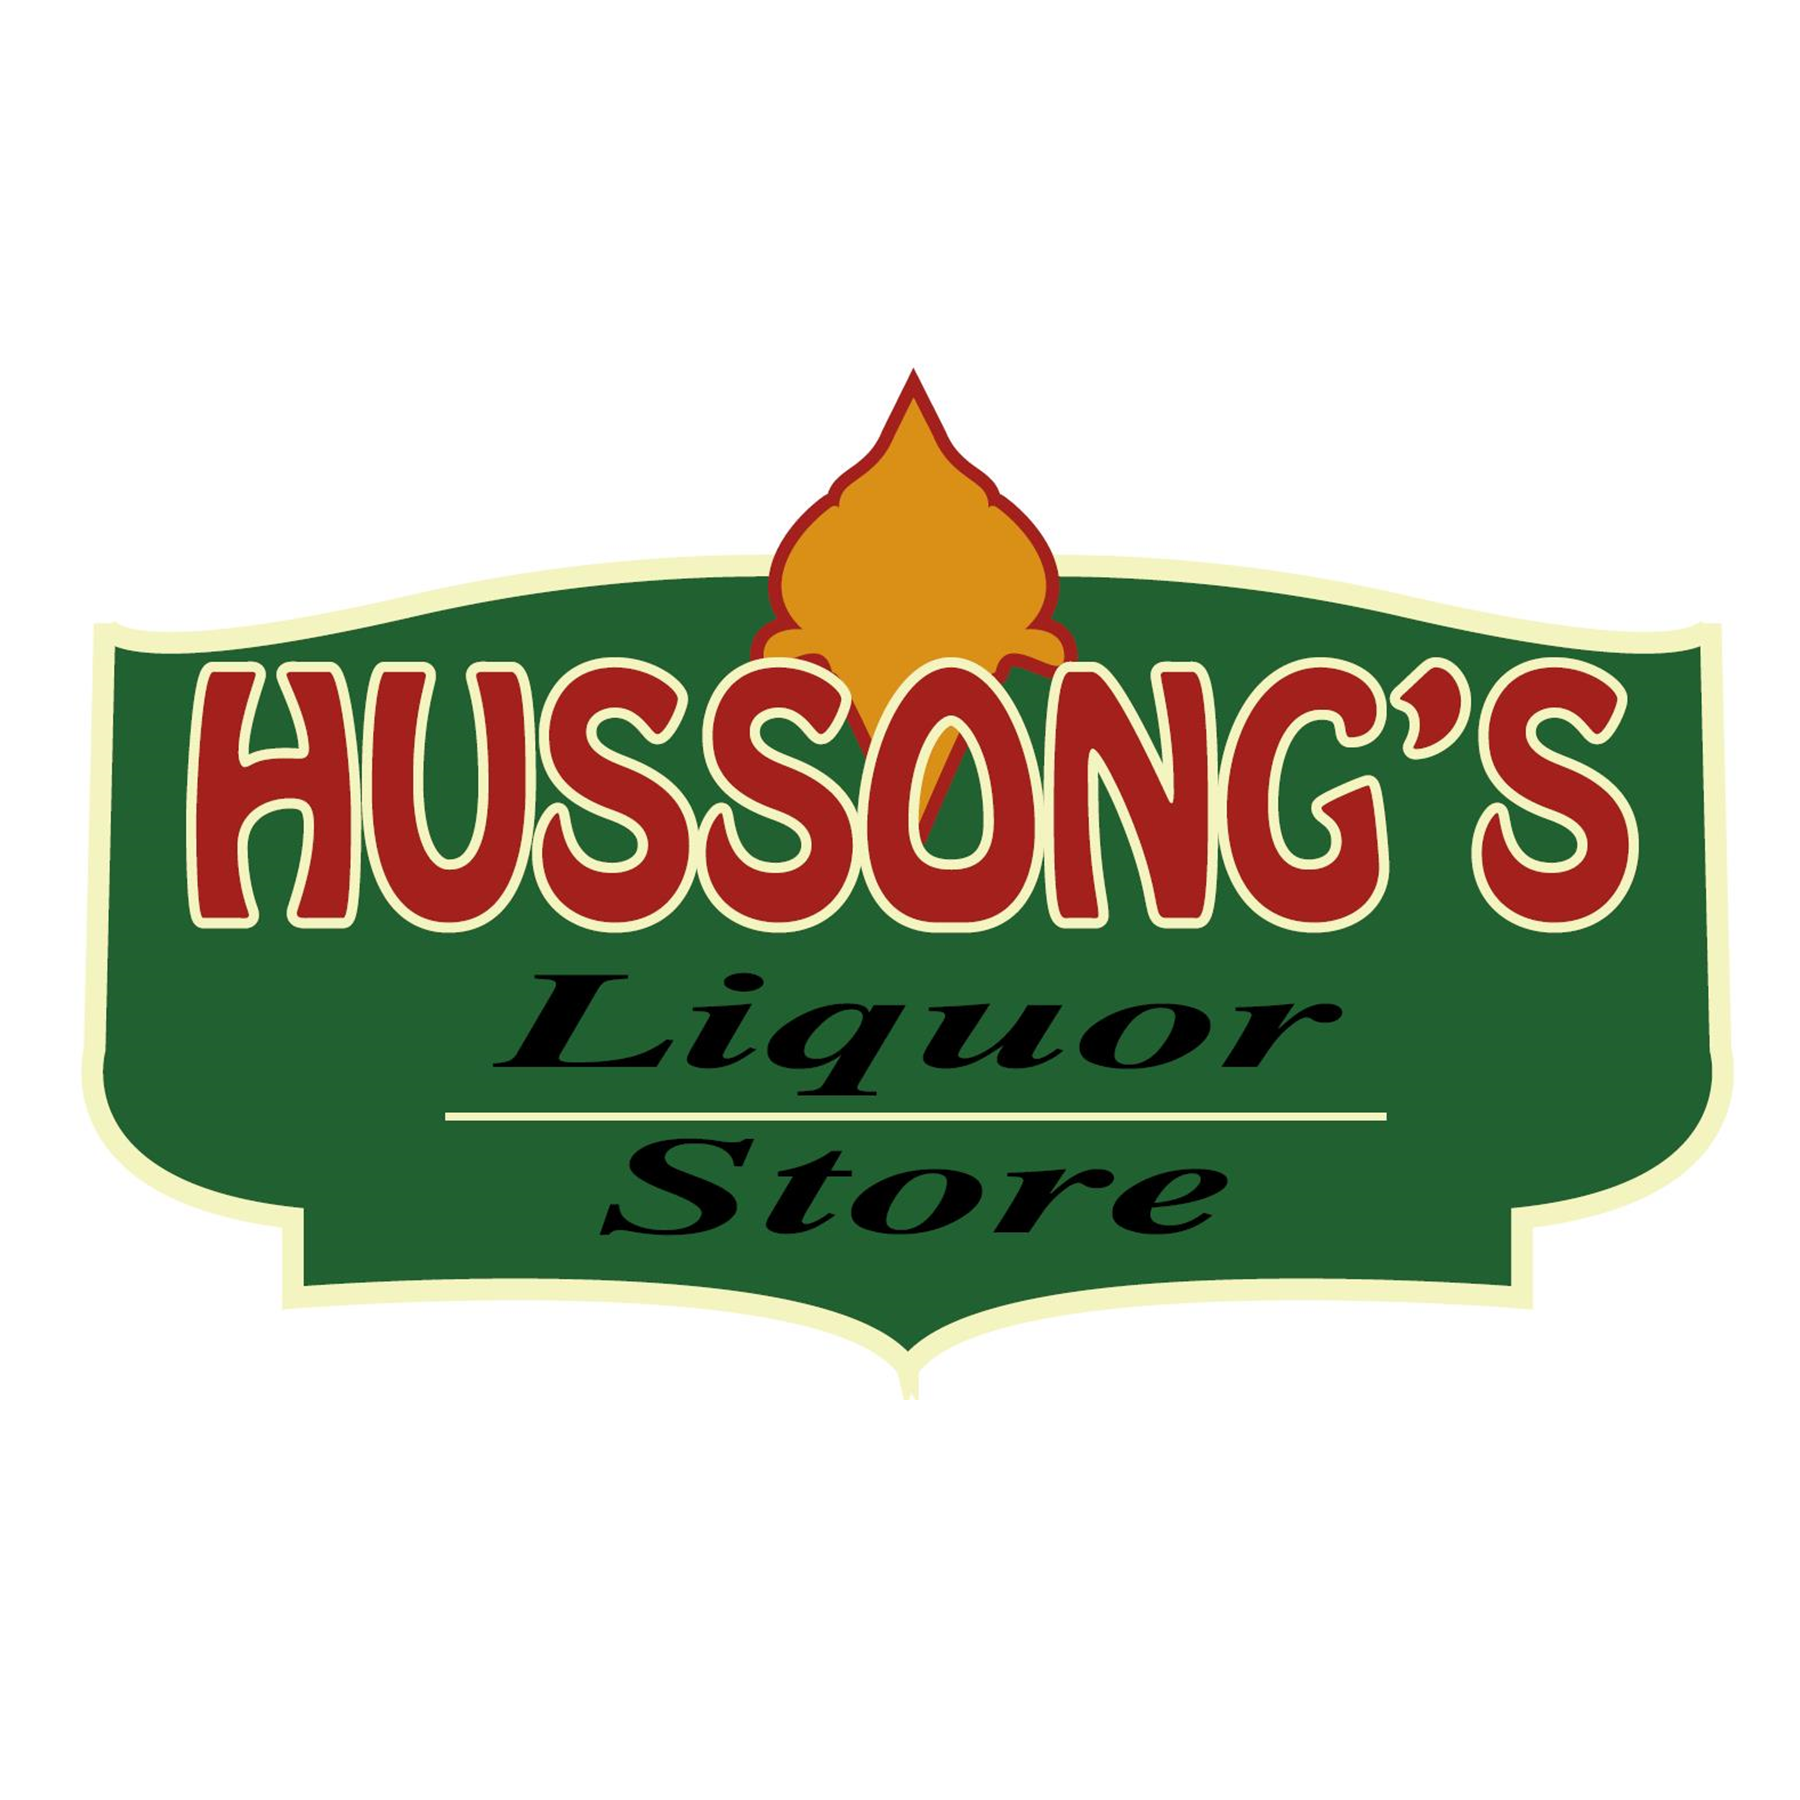 Hussong’s Liquor Store